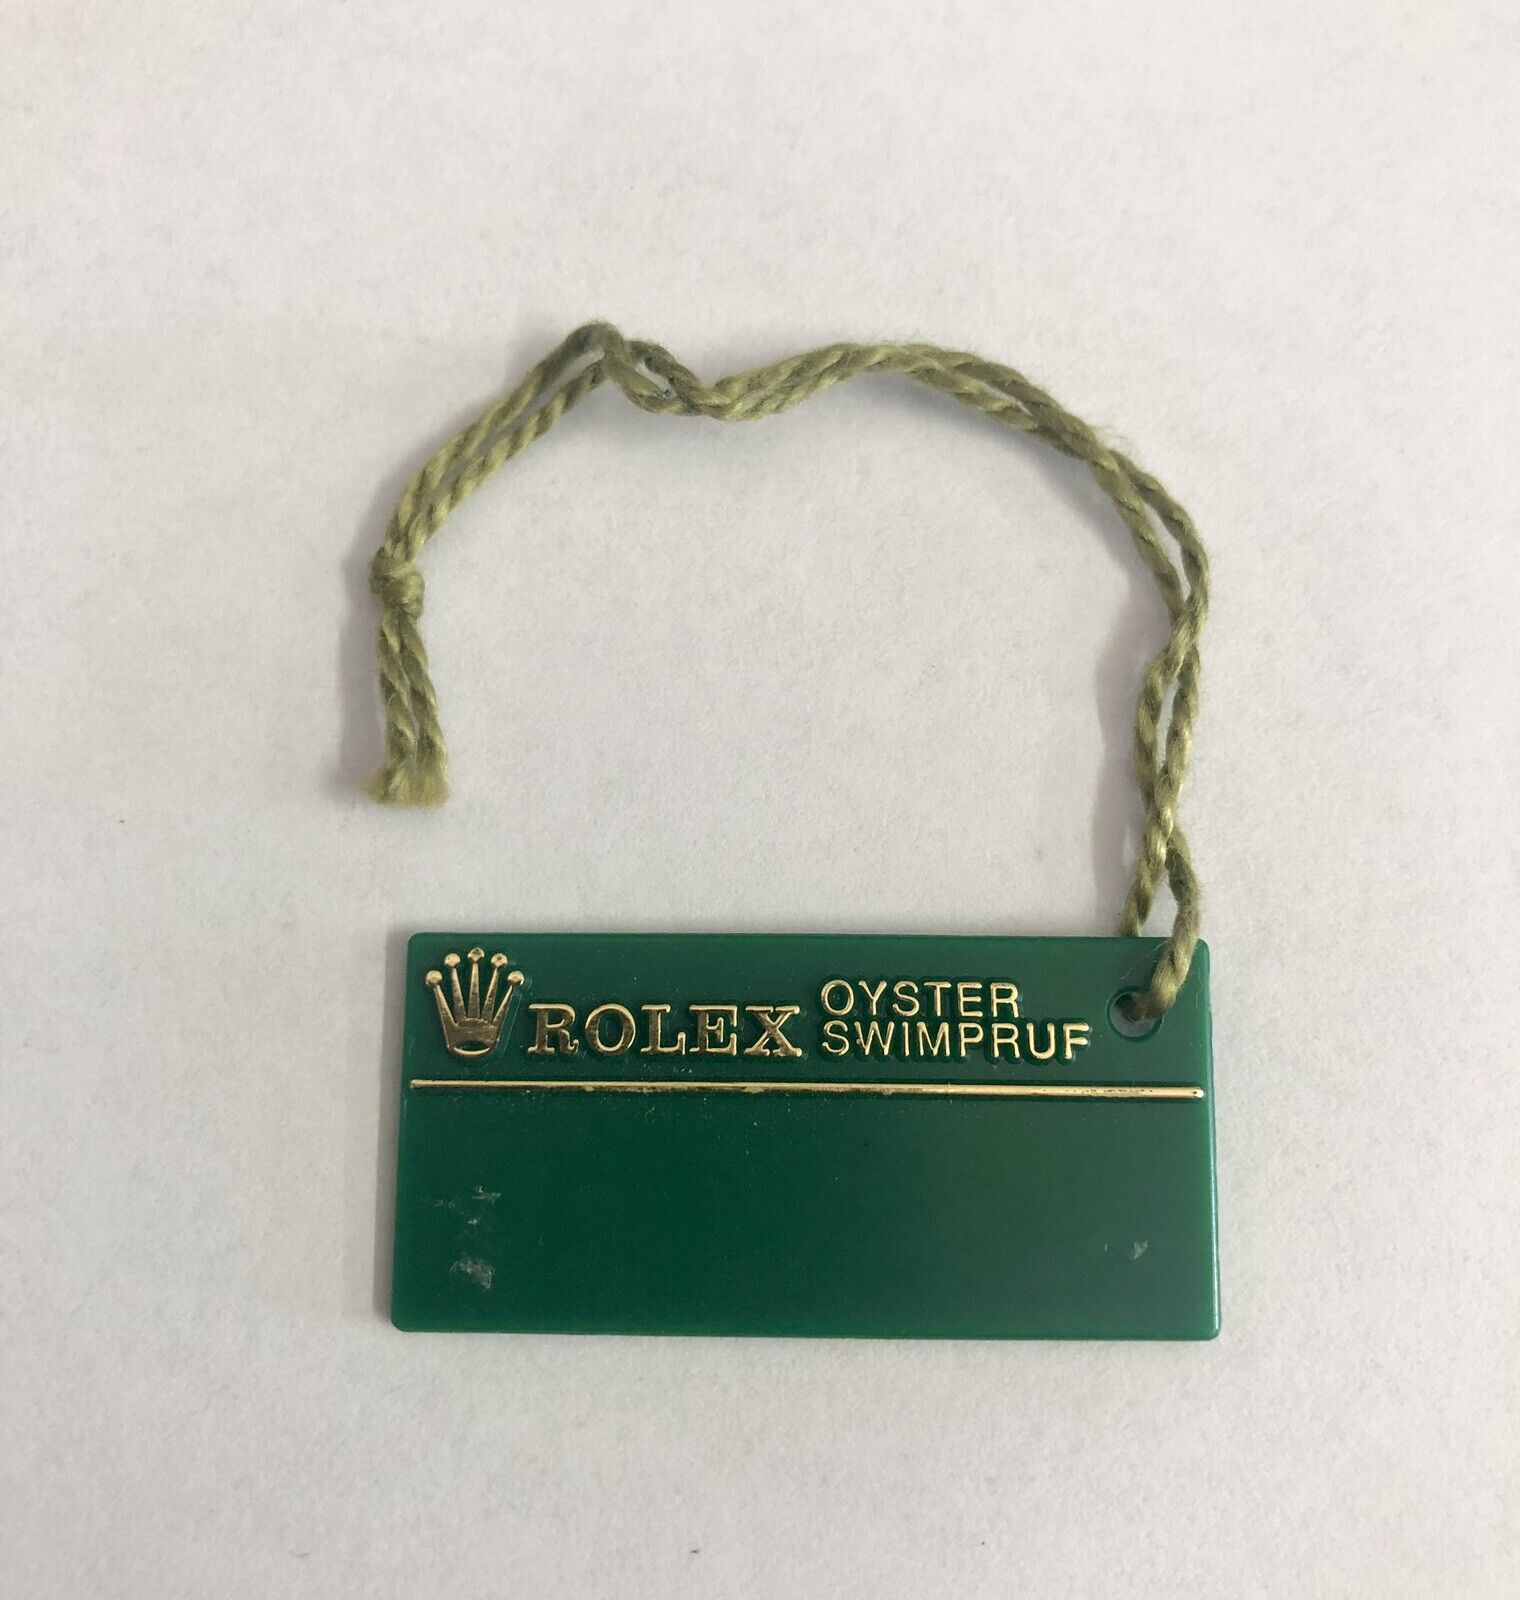 ROLEX Vintage Green Tag Hangtag Oyster Swimpruf S840329 1993 SUBMARINER DATE GMT